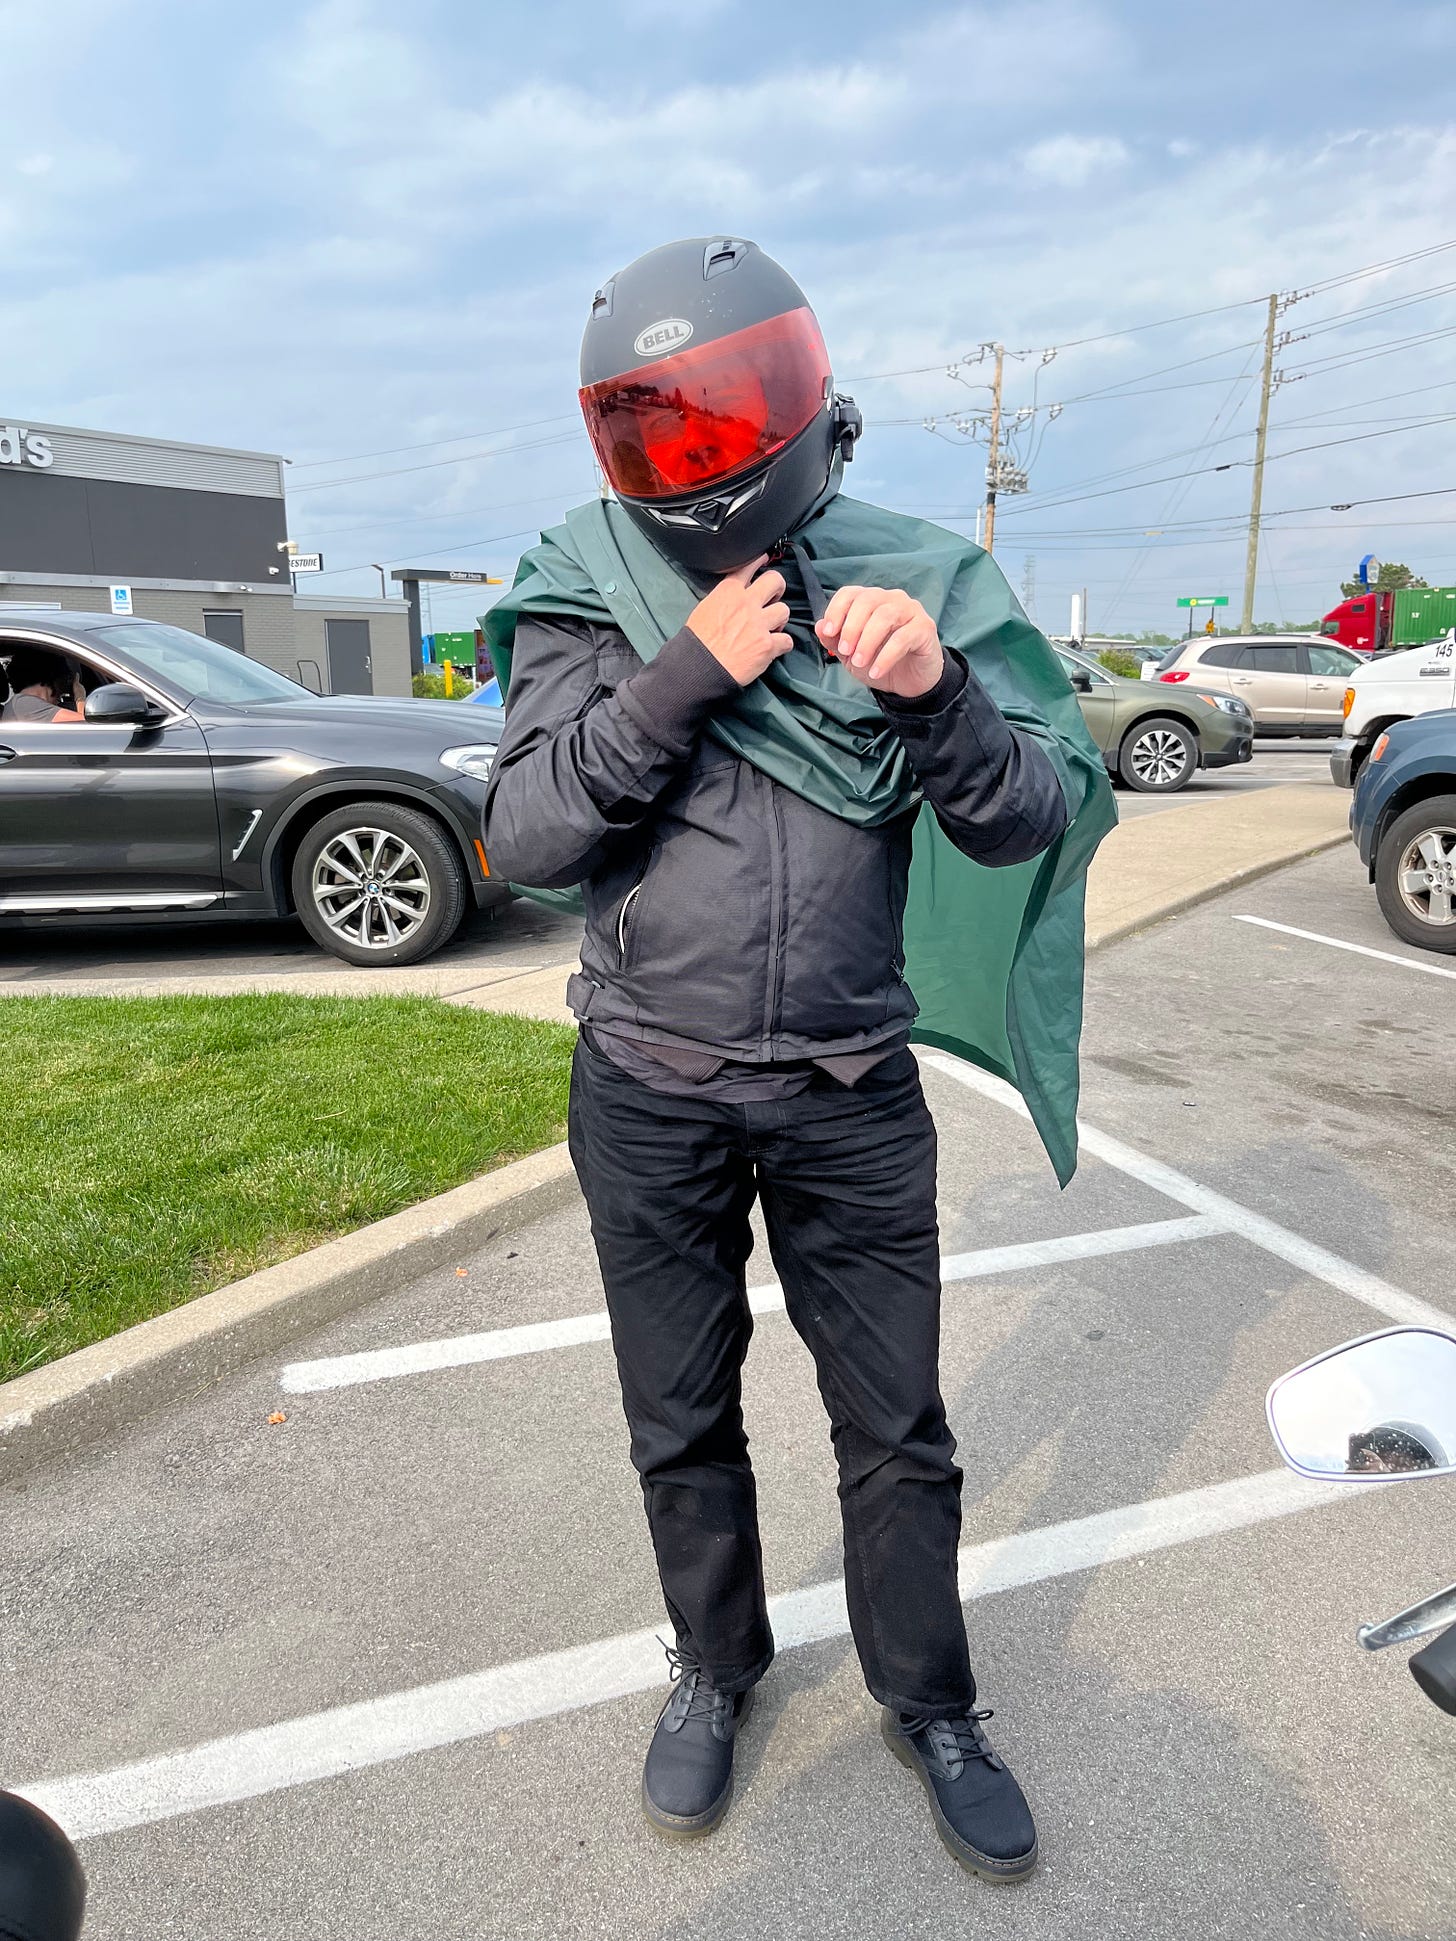 Derrick stands in a parking lot with his helmet still on, putting a rain cover/coat over himself.